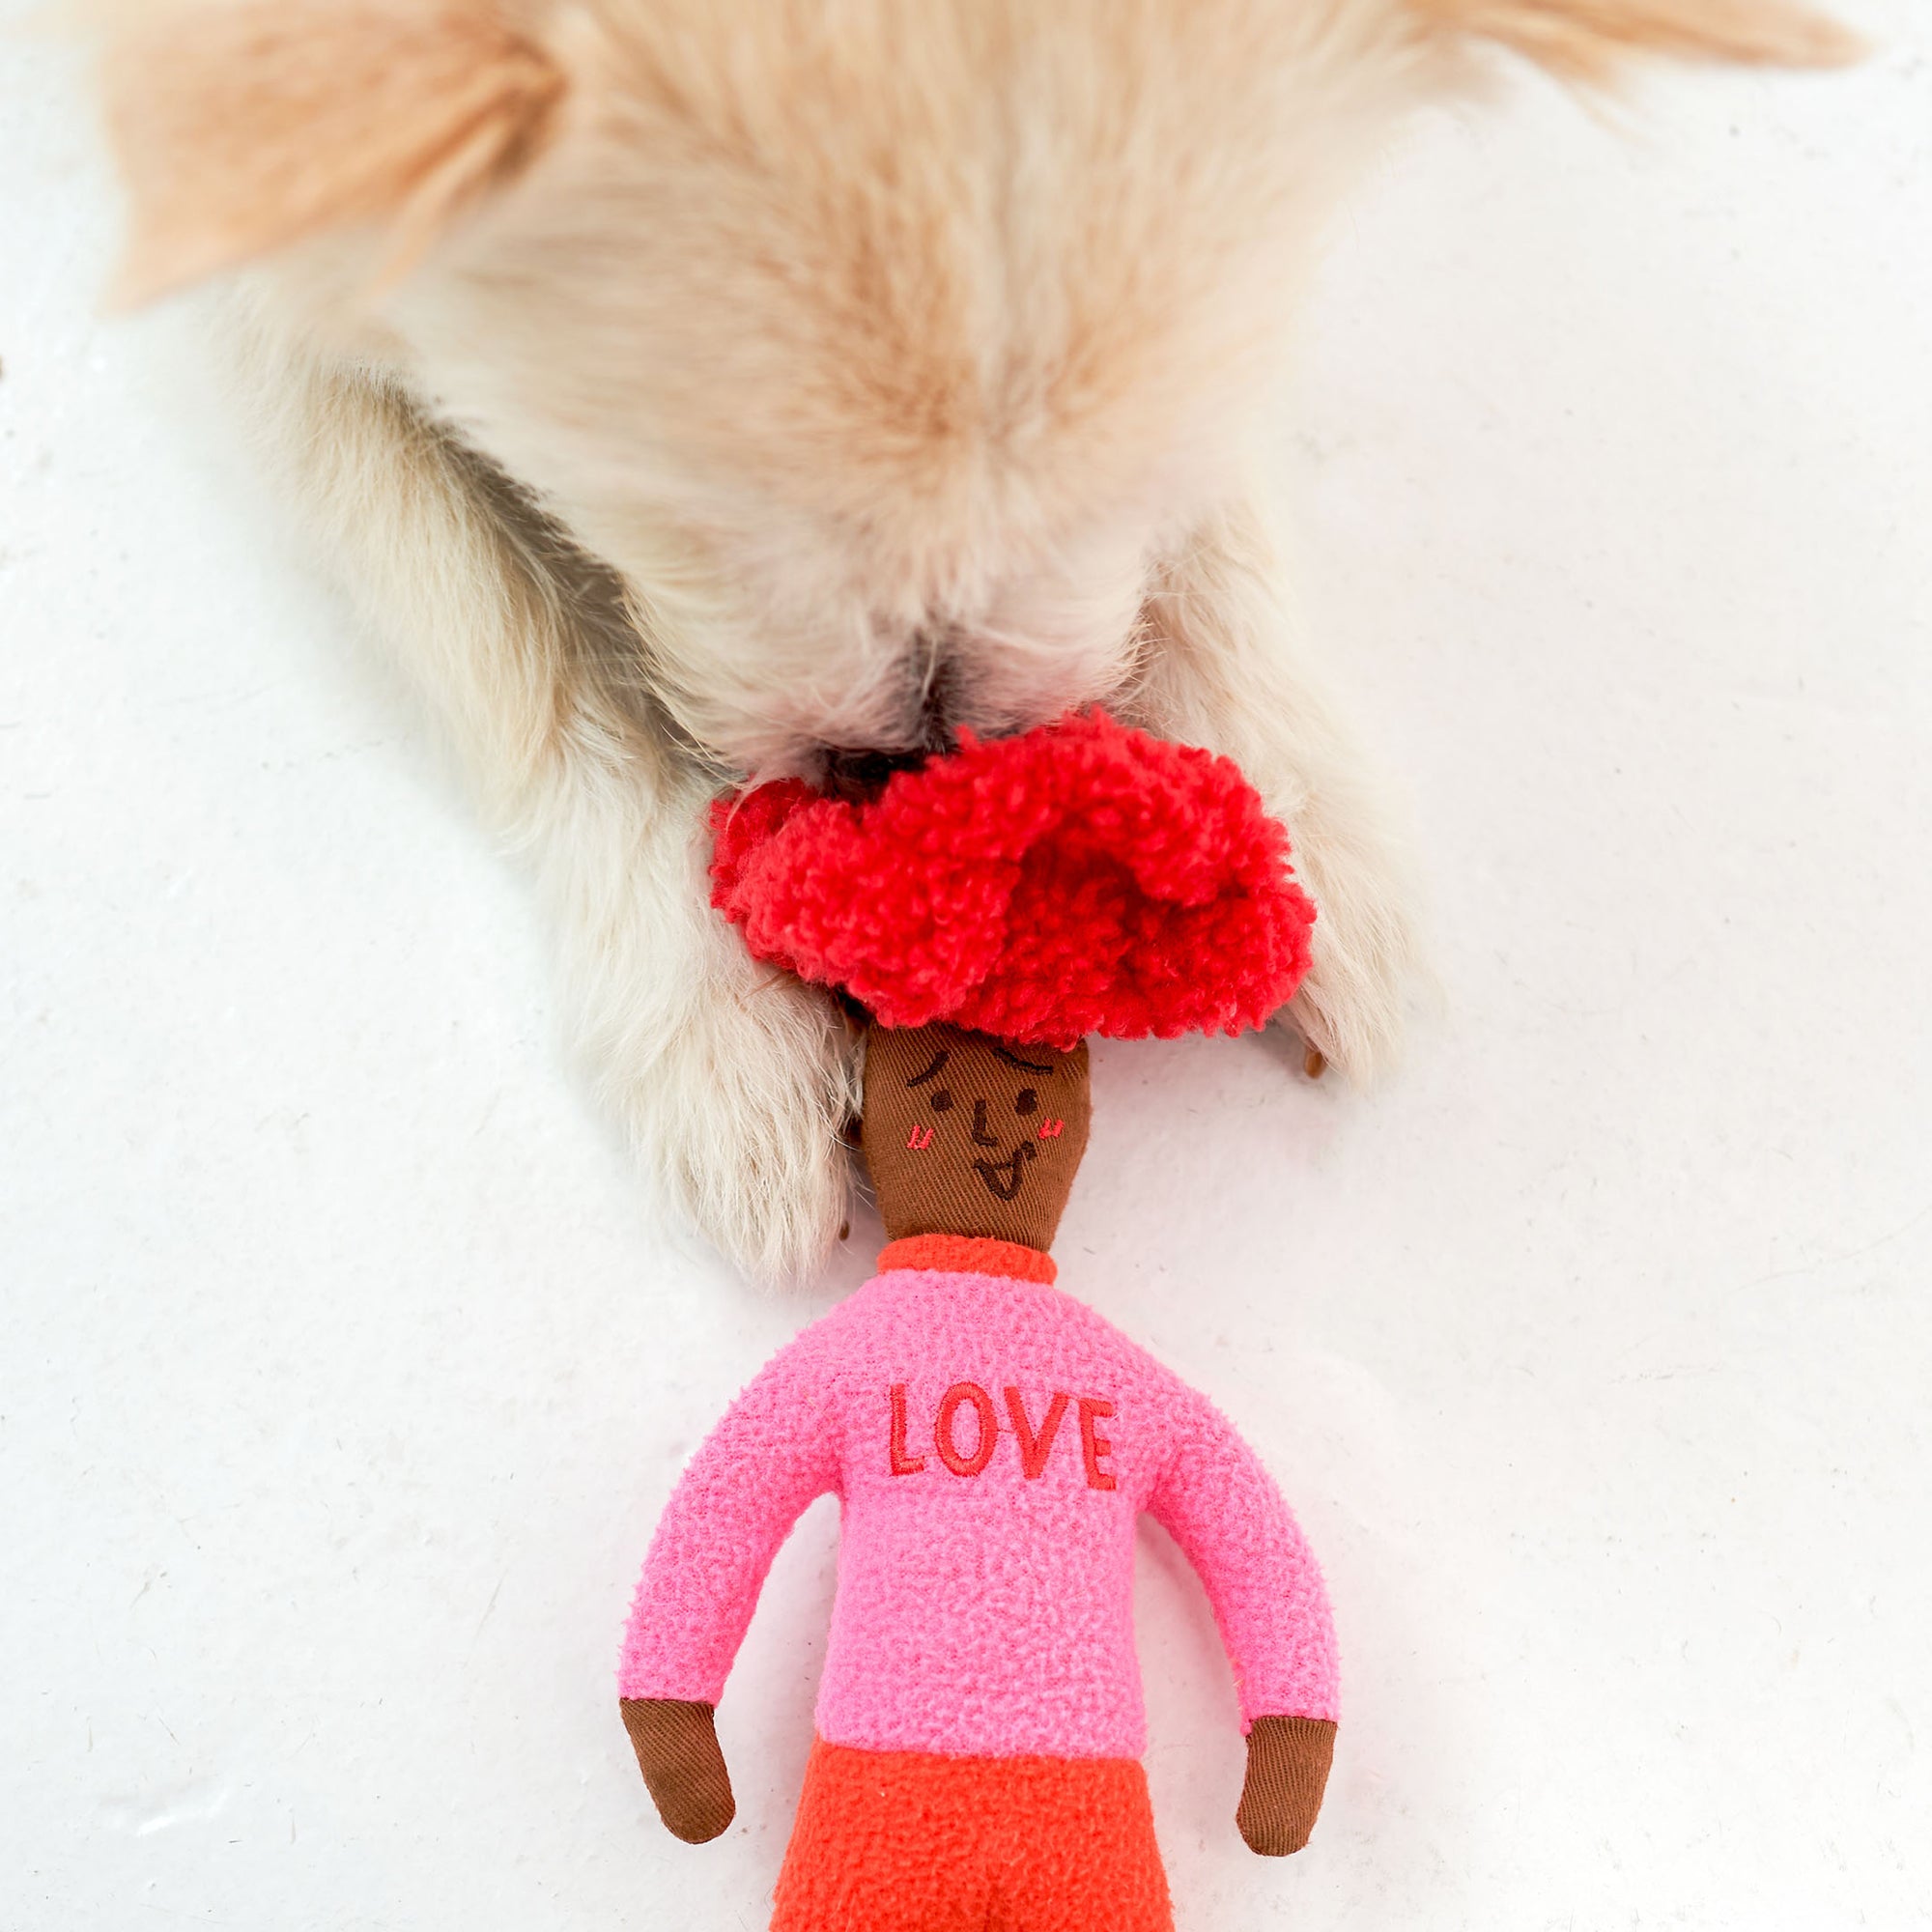 The image captures a dog, with cream-colored fur, engaging with a red-haired, doll-shaped nosework toy against a white background. The toy is wearing a pink shirt with "LOVE" written on it, and orange pants. This scene illustrates the dog’s interaction with the toy, possibly searching for treats inside, while showcasing the toy's vivid colors and playful design intended to stimulate the dog's sense of smell and cognitive skills.